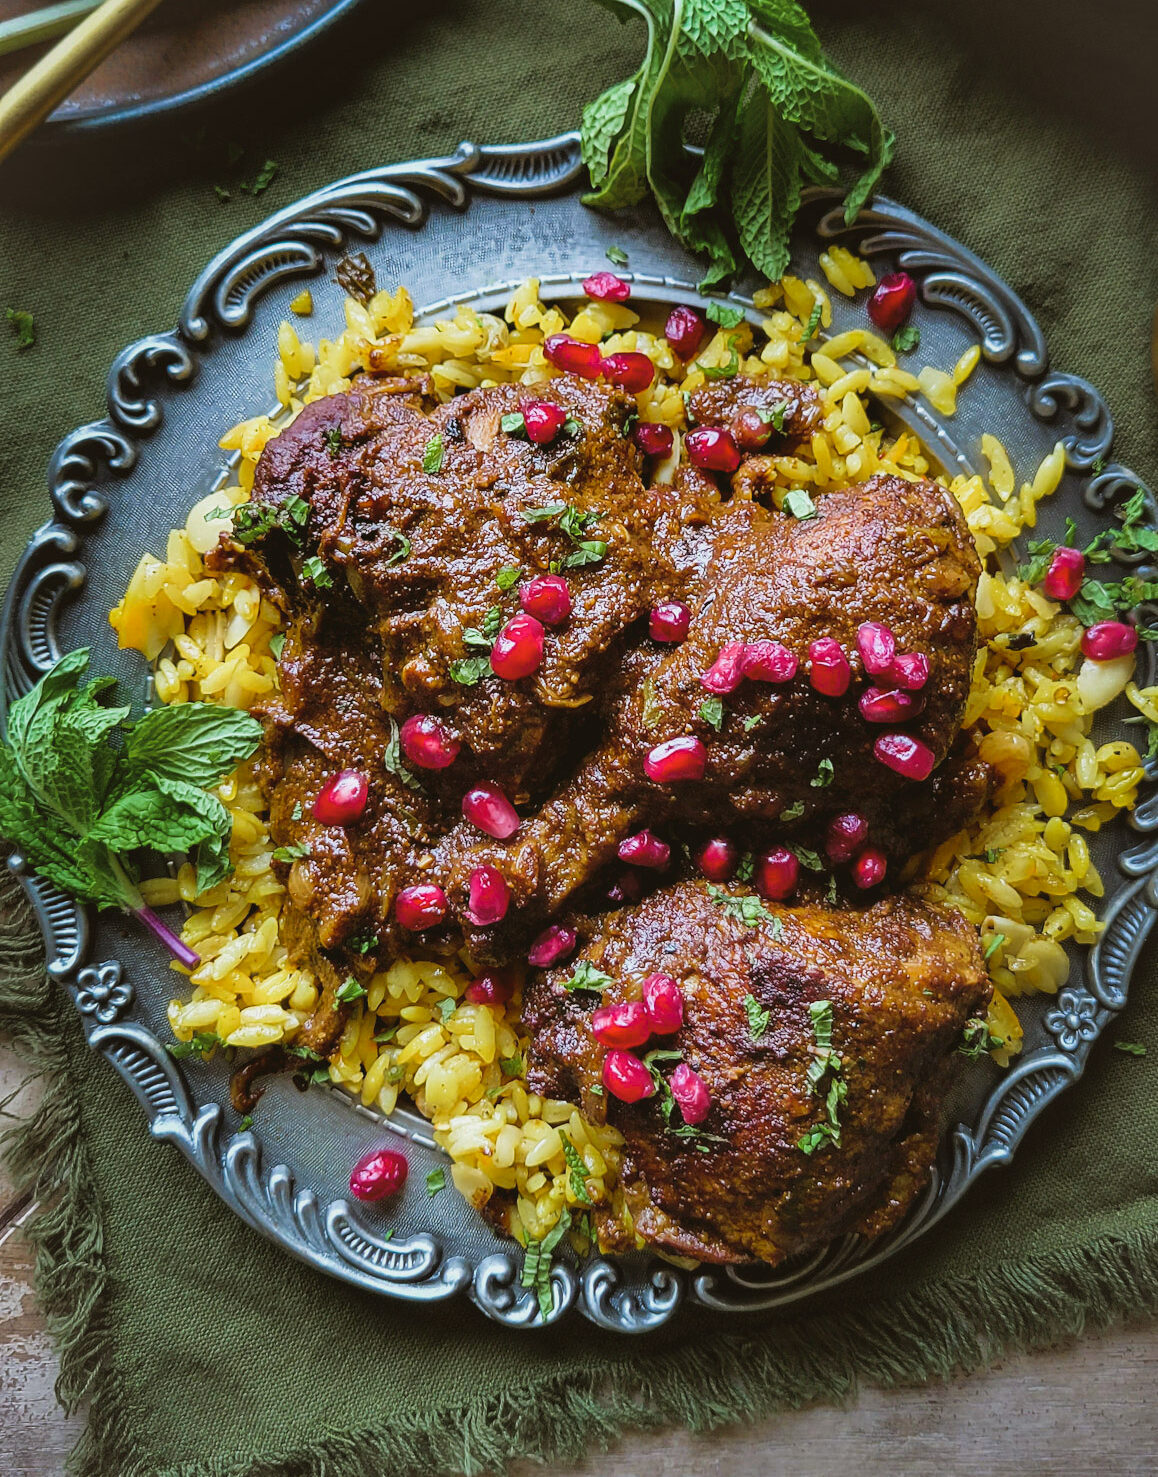 A plate of jewelled saffron Orzo with Chicken Fessenjan, Persian Walnut and Pomegranate Stew. Pomegranate arils and mint leaves are scattered around the dish.